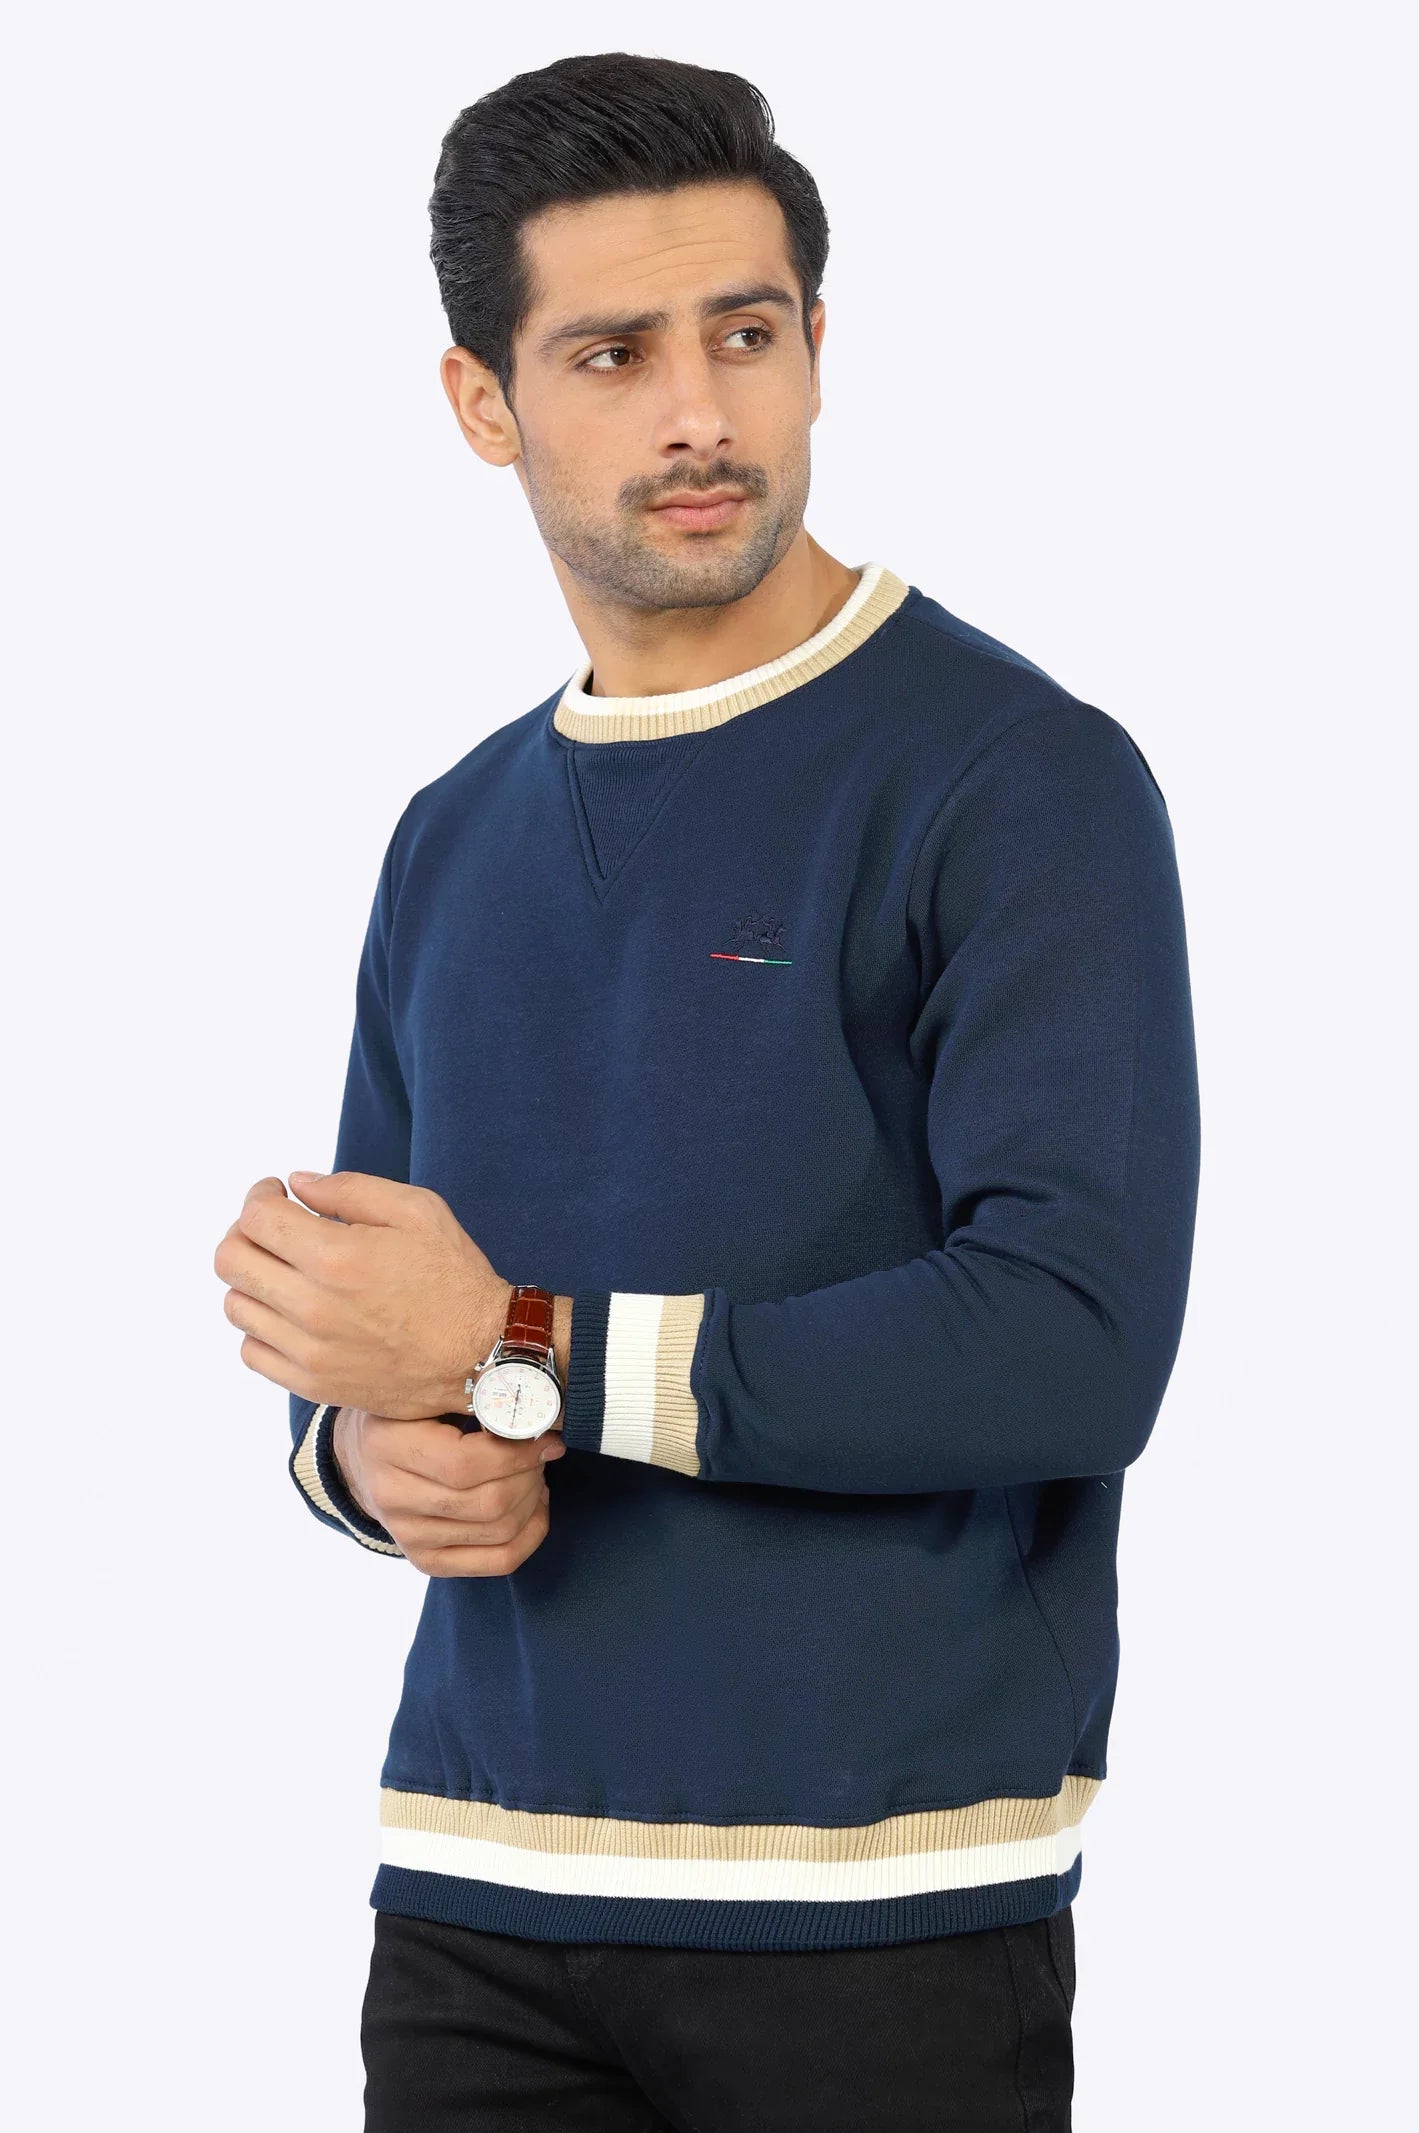 Navy Blue Plain Sweatshirt From Diners